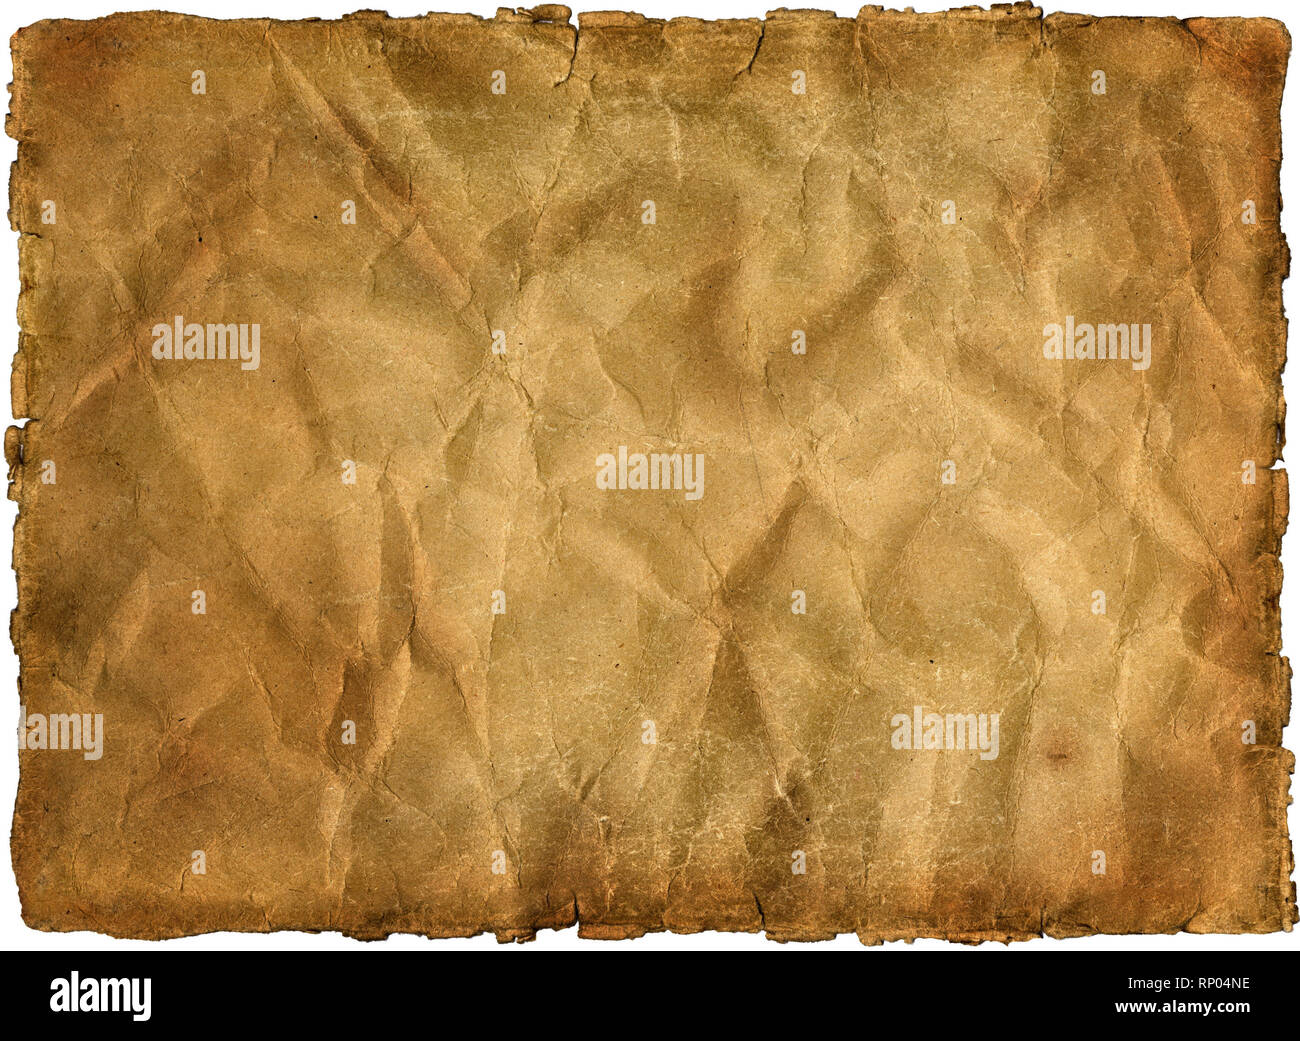 Background, old yellowed and stained sheet of paper on a white background, isolated Stock Photo